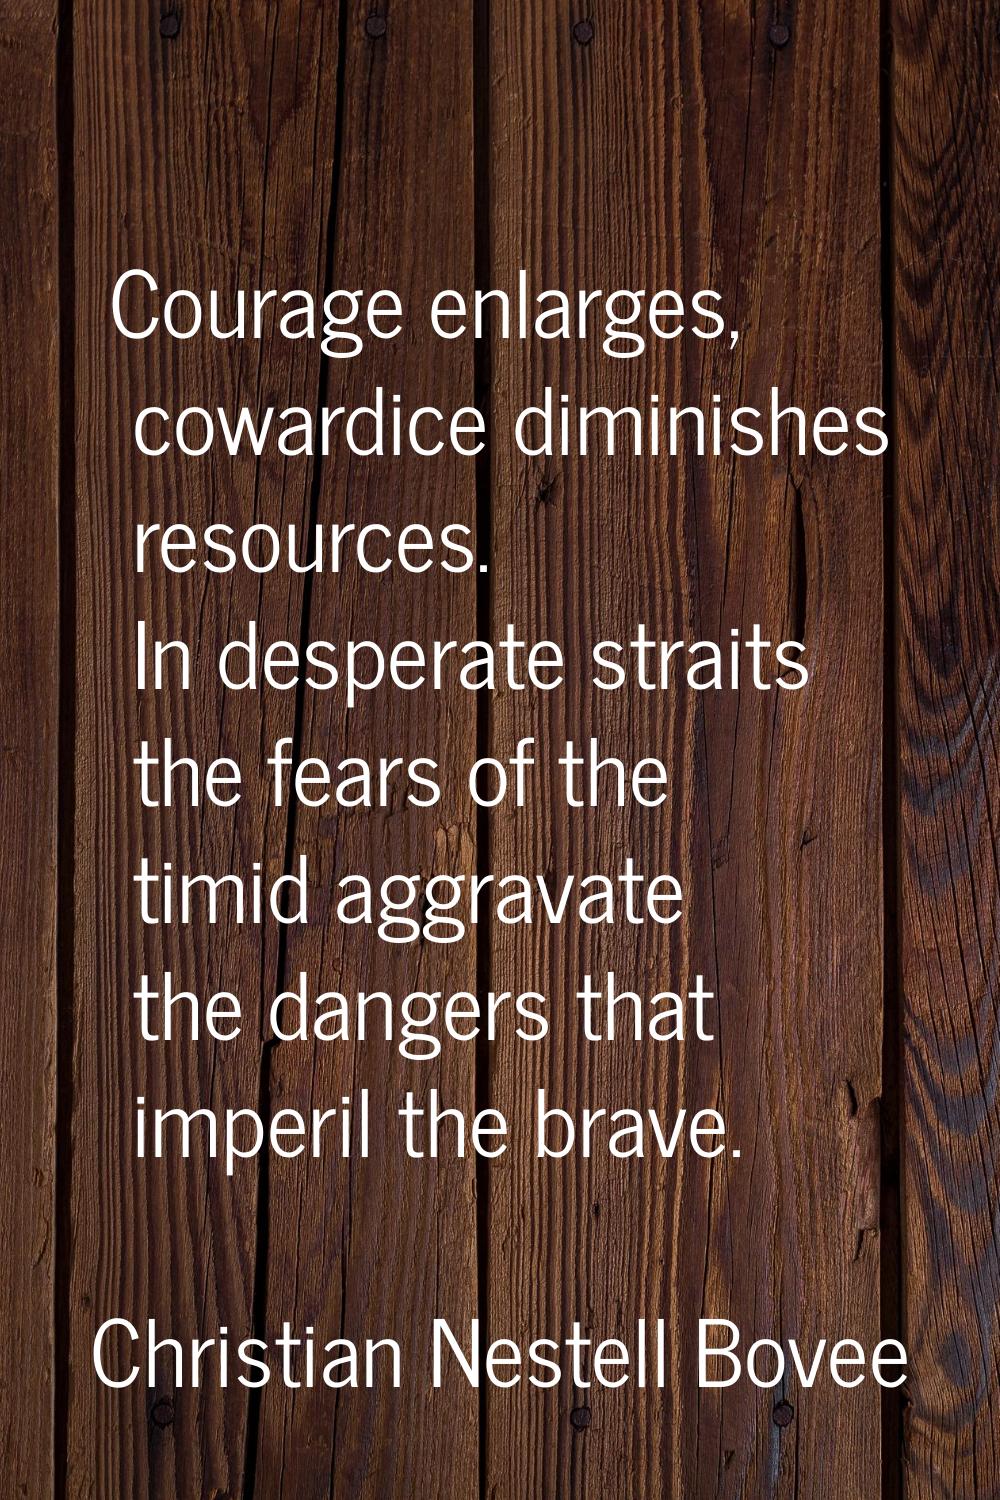 Courage enlarges, cowardice diminishes resources. In desperate straits the fears of the timid aggra